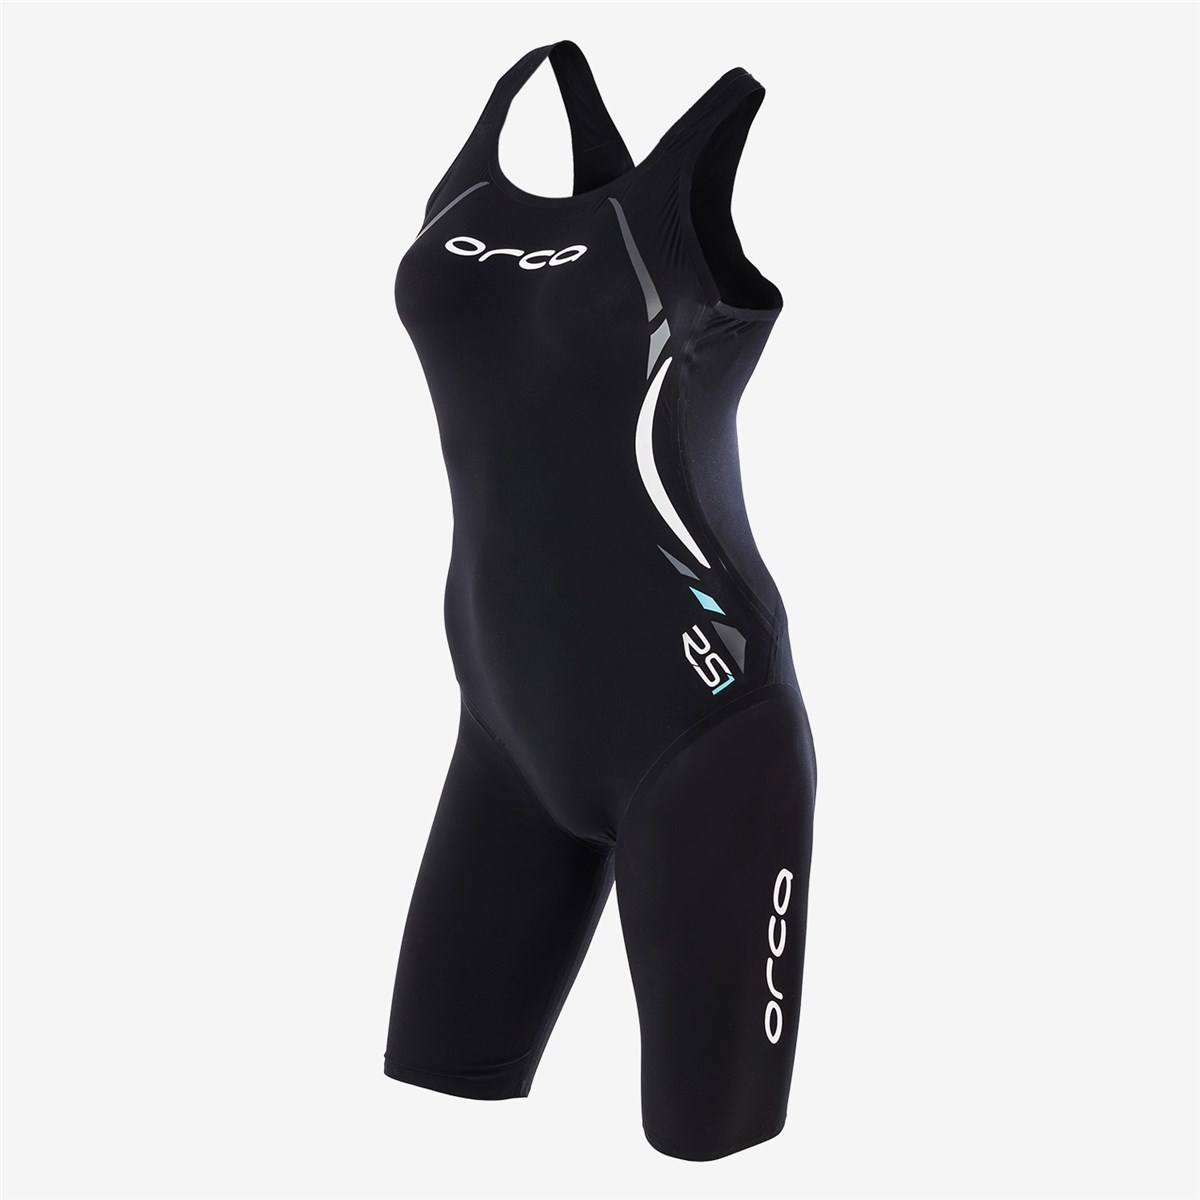 Orca Womens RS1 Killa Race Suit product image